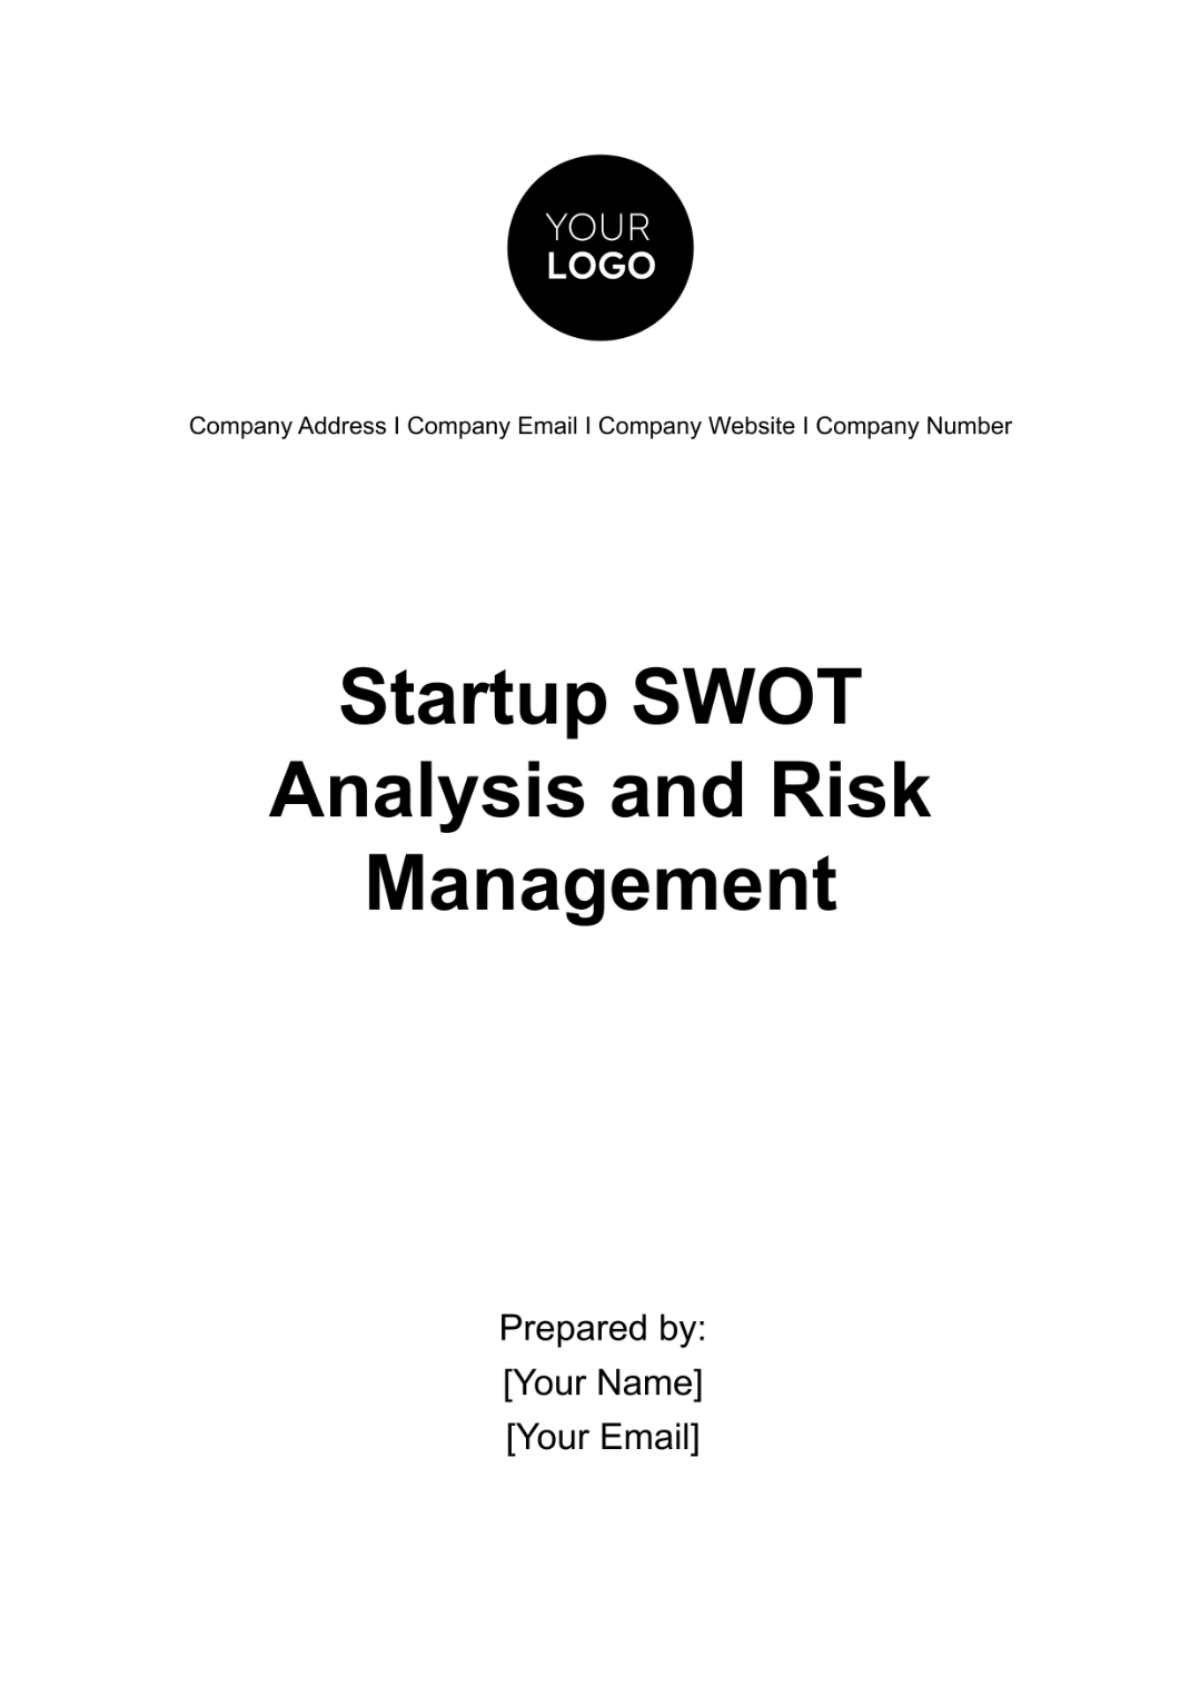 Free Startup SWOT Analysis and Risk Management Plan Template